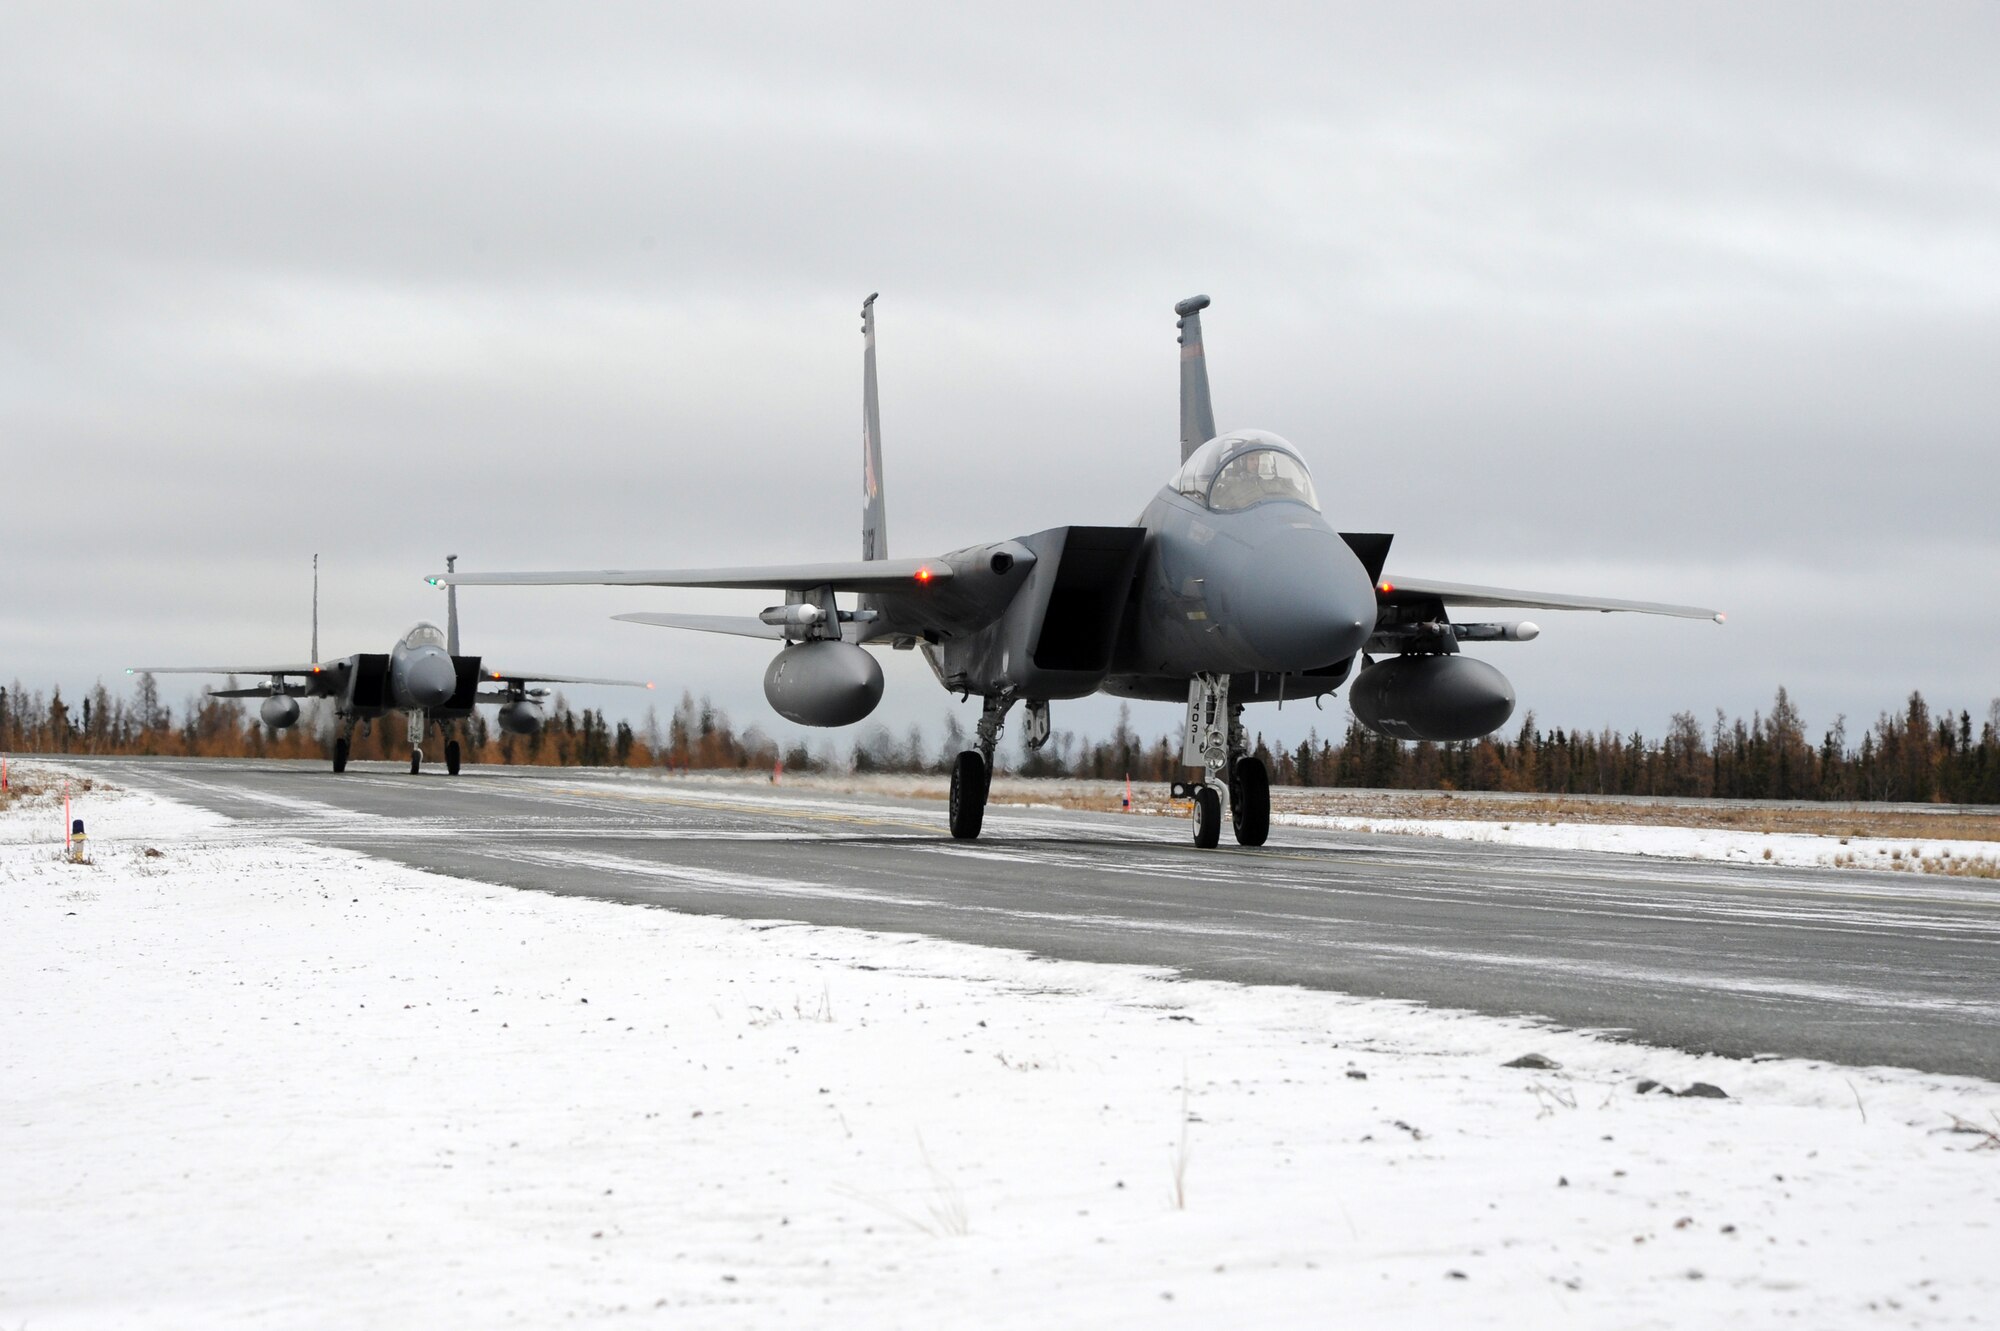 F-15 Eagles from the 142nd Fighter Wing arrive in Yellowknife, Northwest Territories, for Exercise Vigilant Shield 2017, Oct. 17, 2016. Vigilant Shield 17 represents a unique opportunity to practice and hone joint interoperability and cooperation skills between Canada and the United States in order to protect borders as well as national interests.  (U.S. Air National Guard photo by Senior Master Sgt. Shelly Davison, 142nd Fighter Wing Public Affairs).